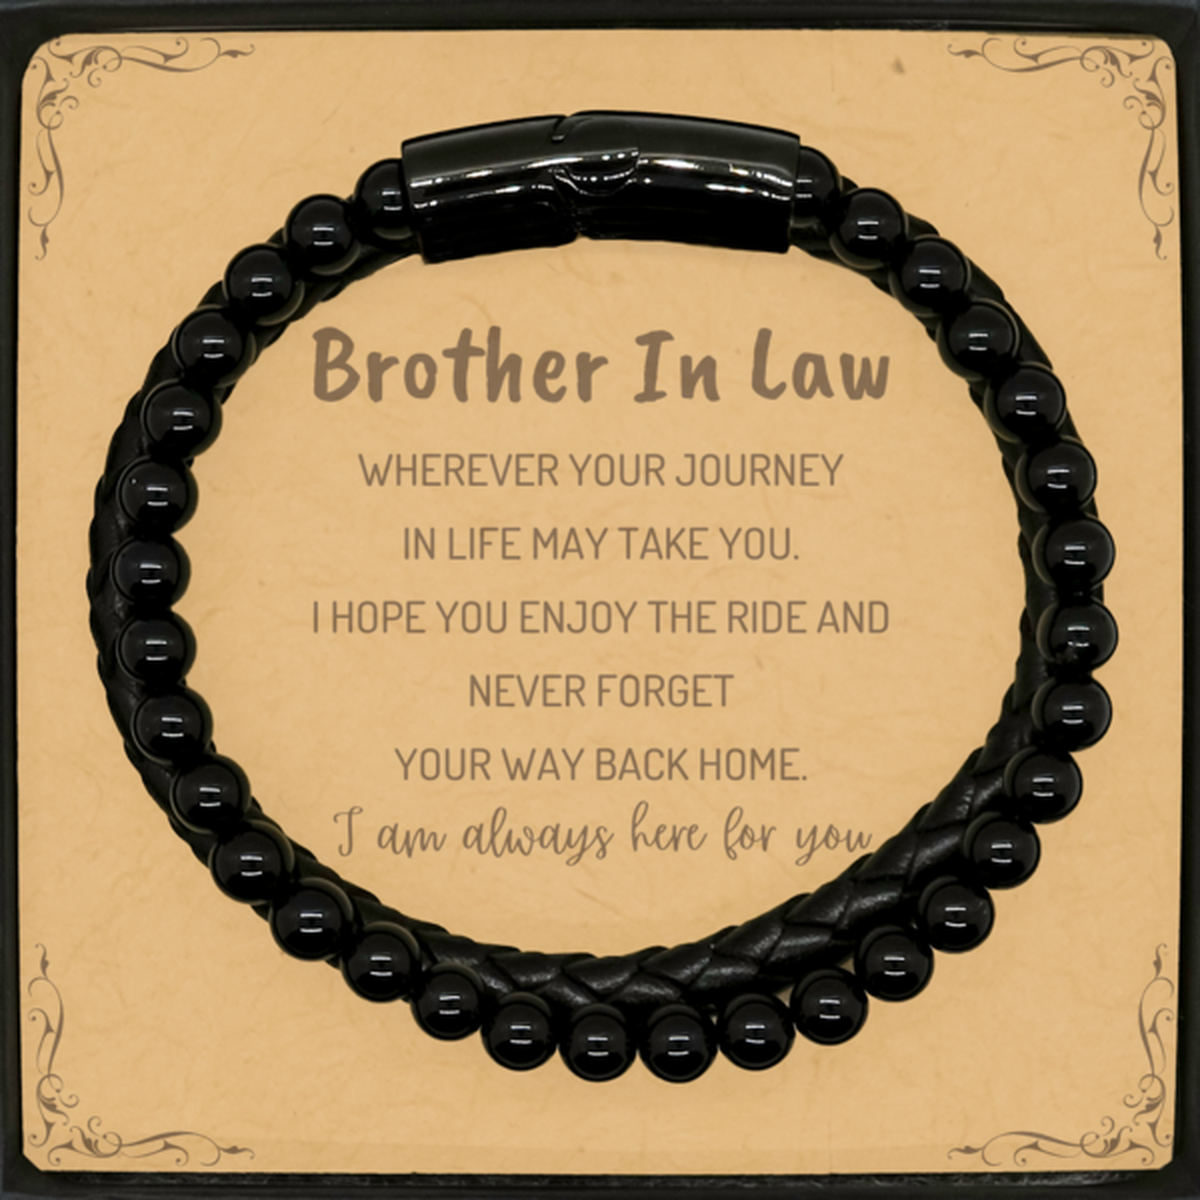 Brother In Law wherever your journey in life may take you, I am always here for you Brother In Law Stone Leather Bracelets, Awesome Christmas Gifts For Brother In Law Message Card, Brother In Law Birthday Gifts for Men Women Family Loved One